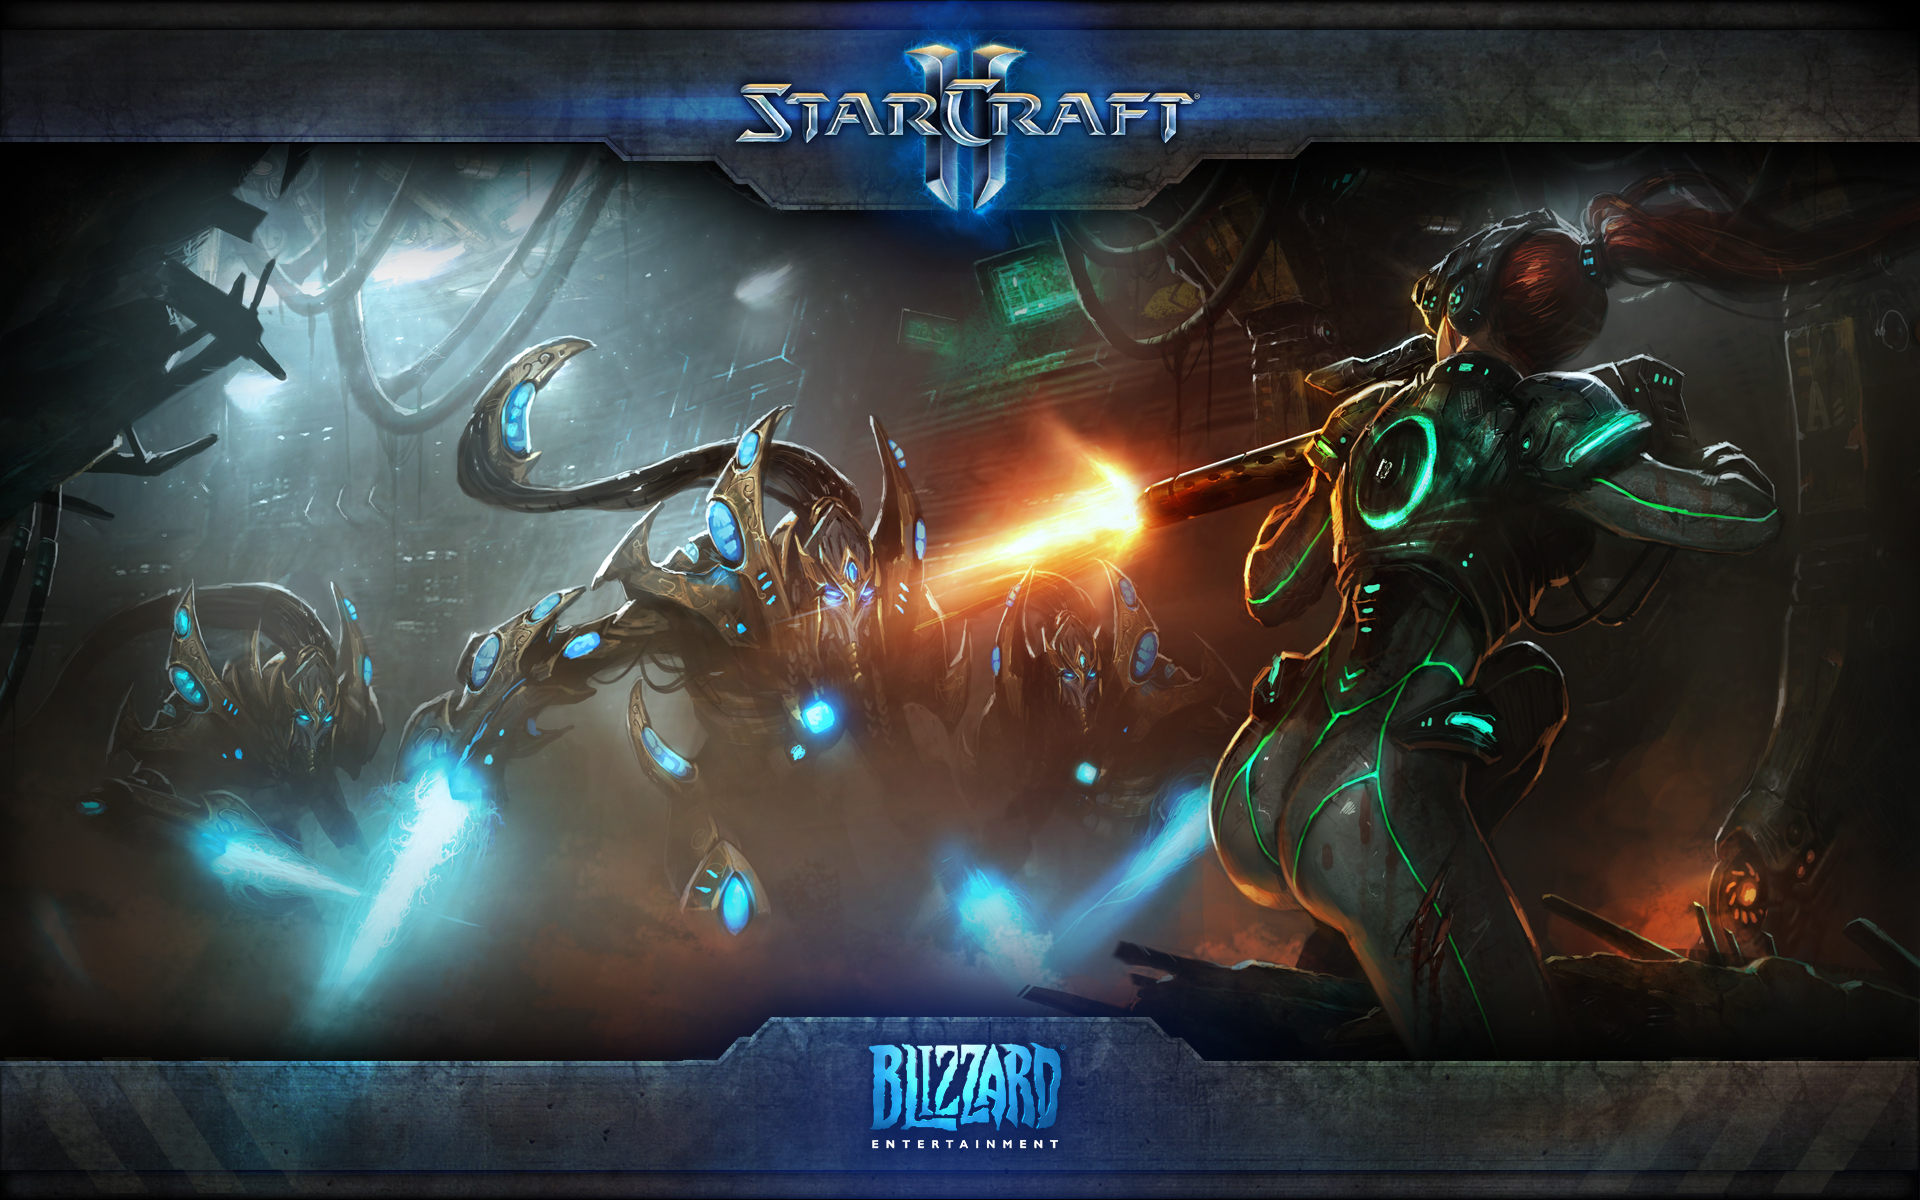 Starcraft2 Wallpaper P Submited Image